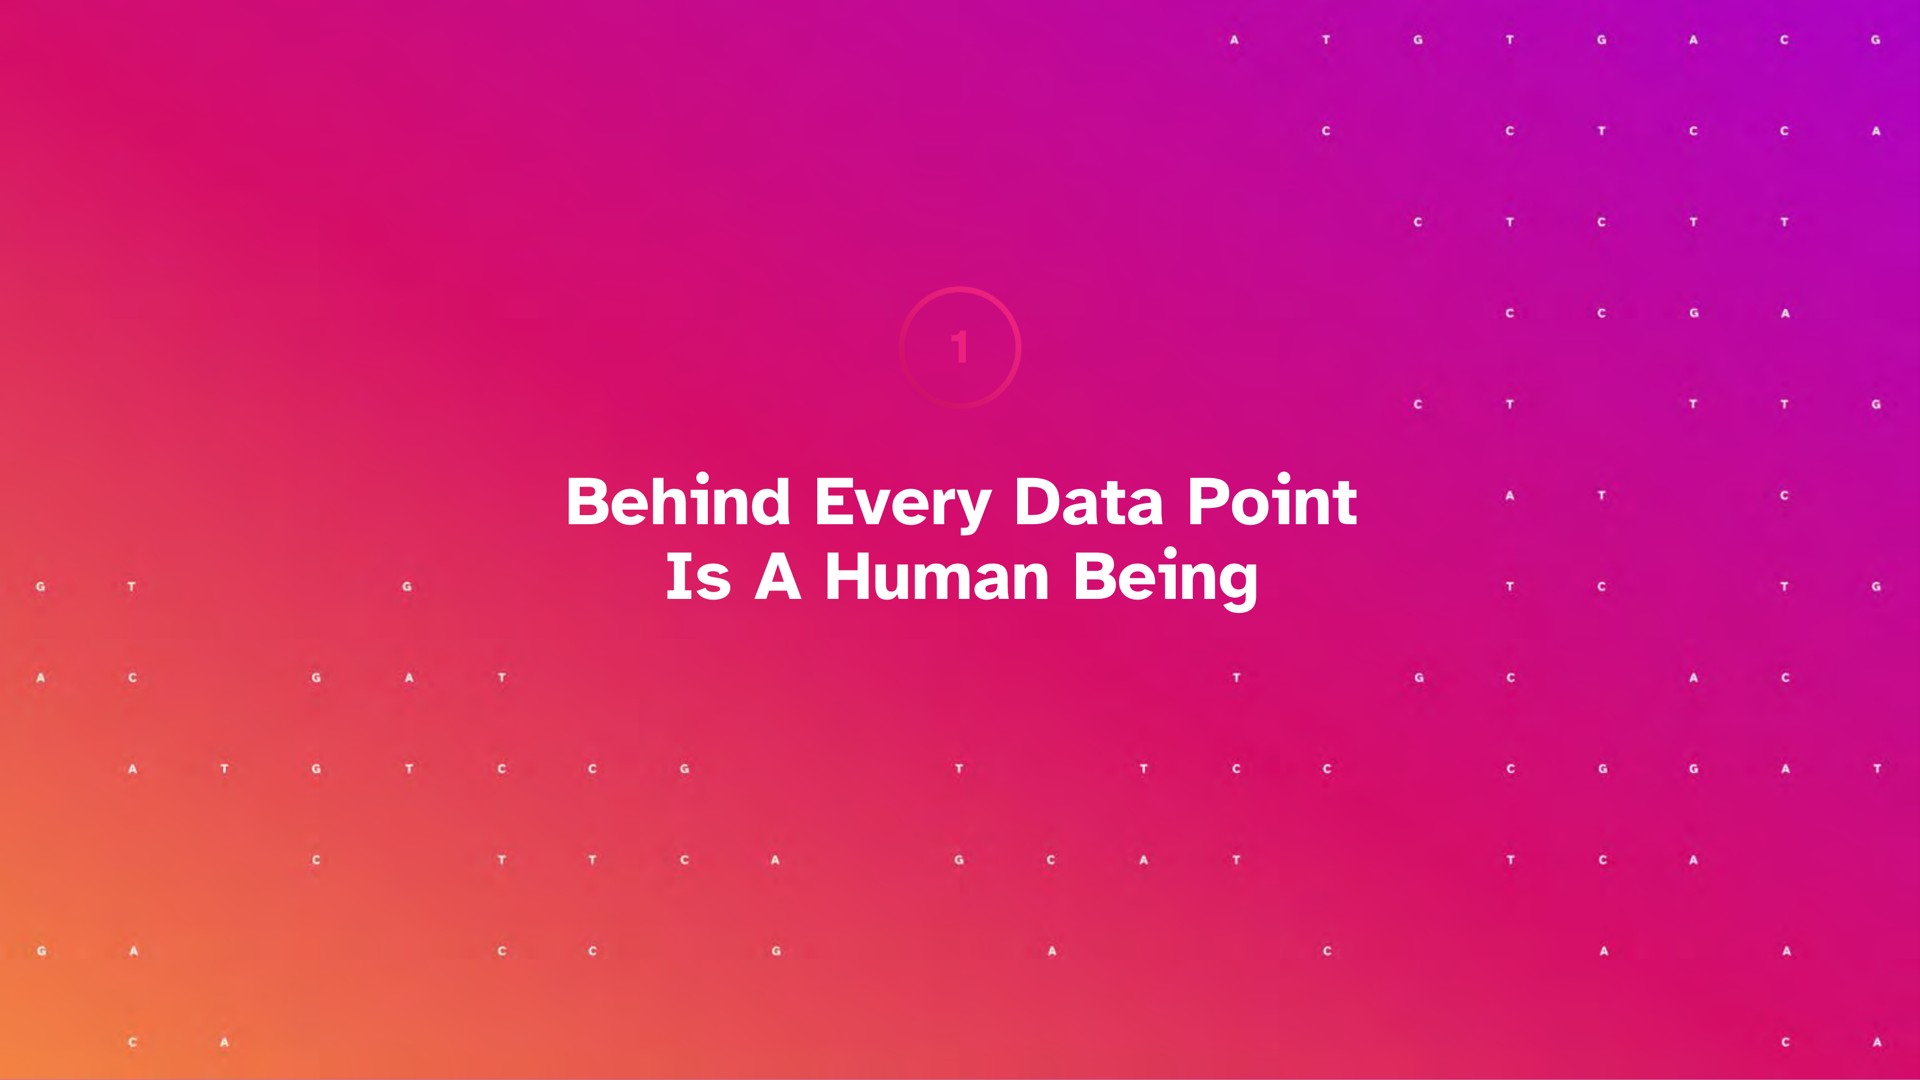 behind every data point is a human being | 23andMe